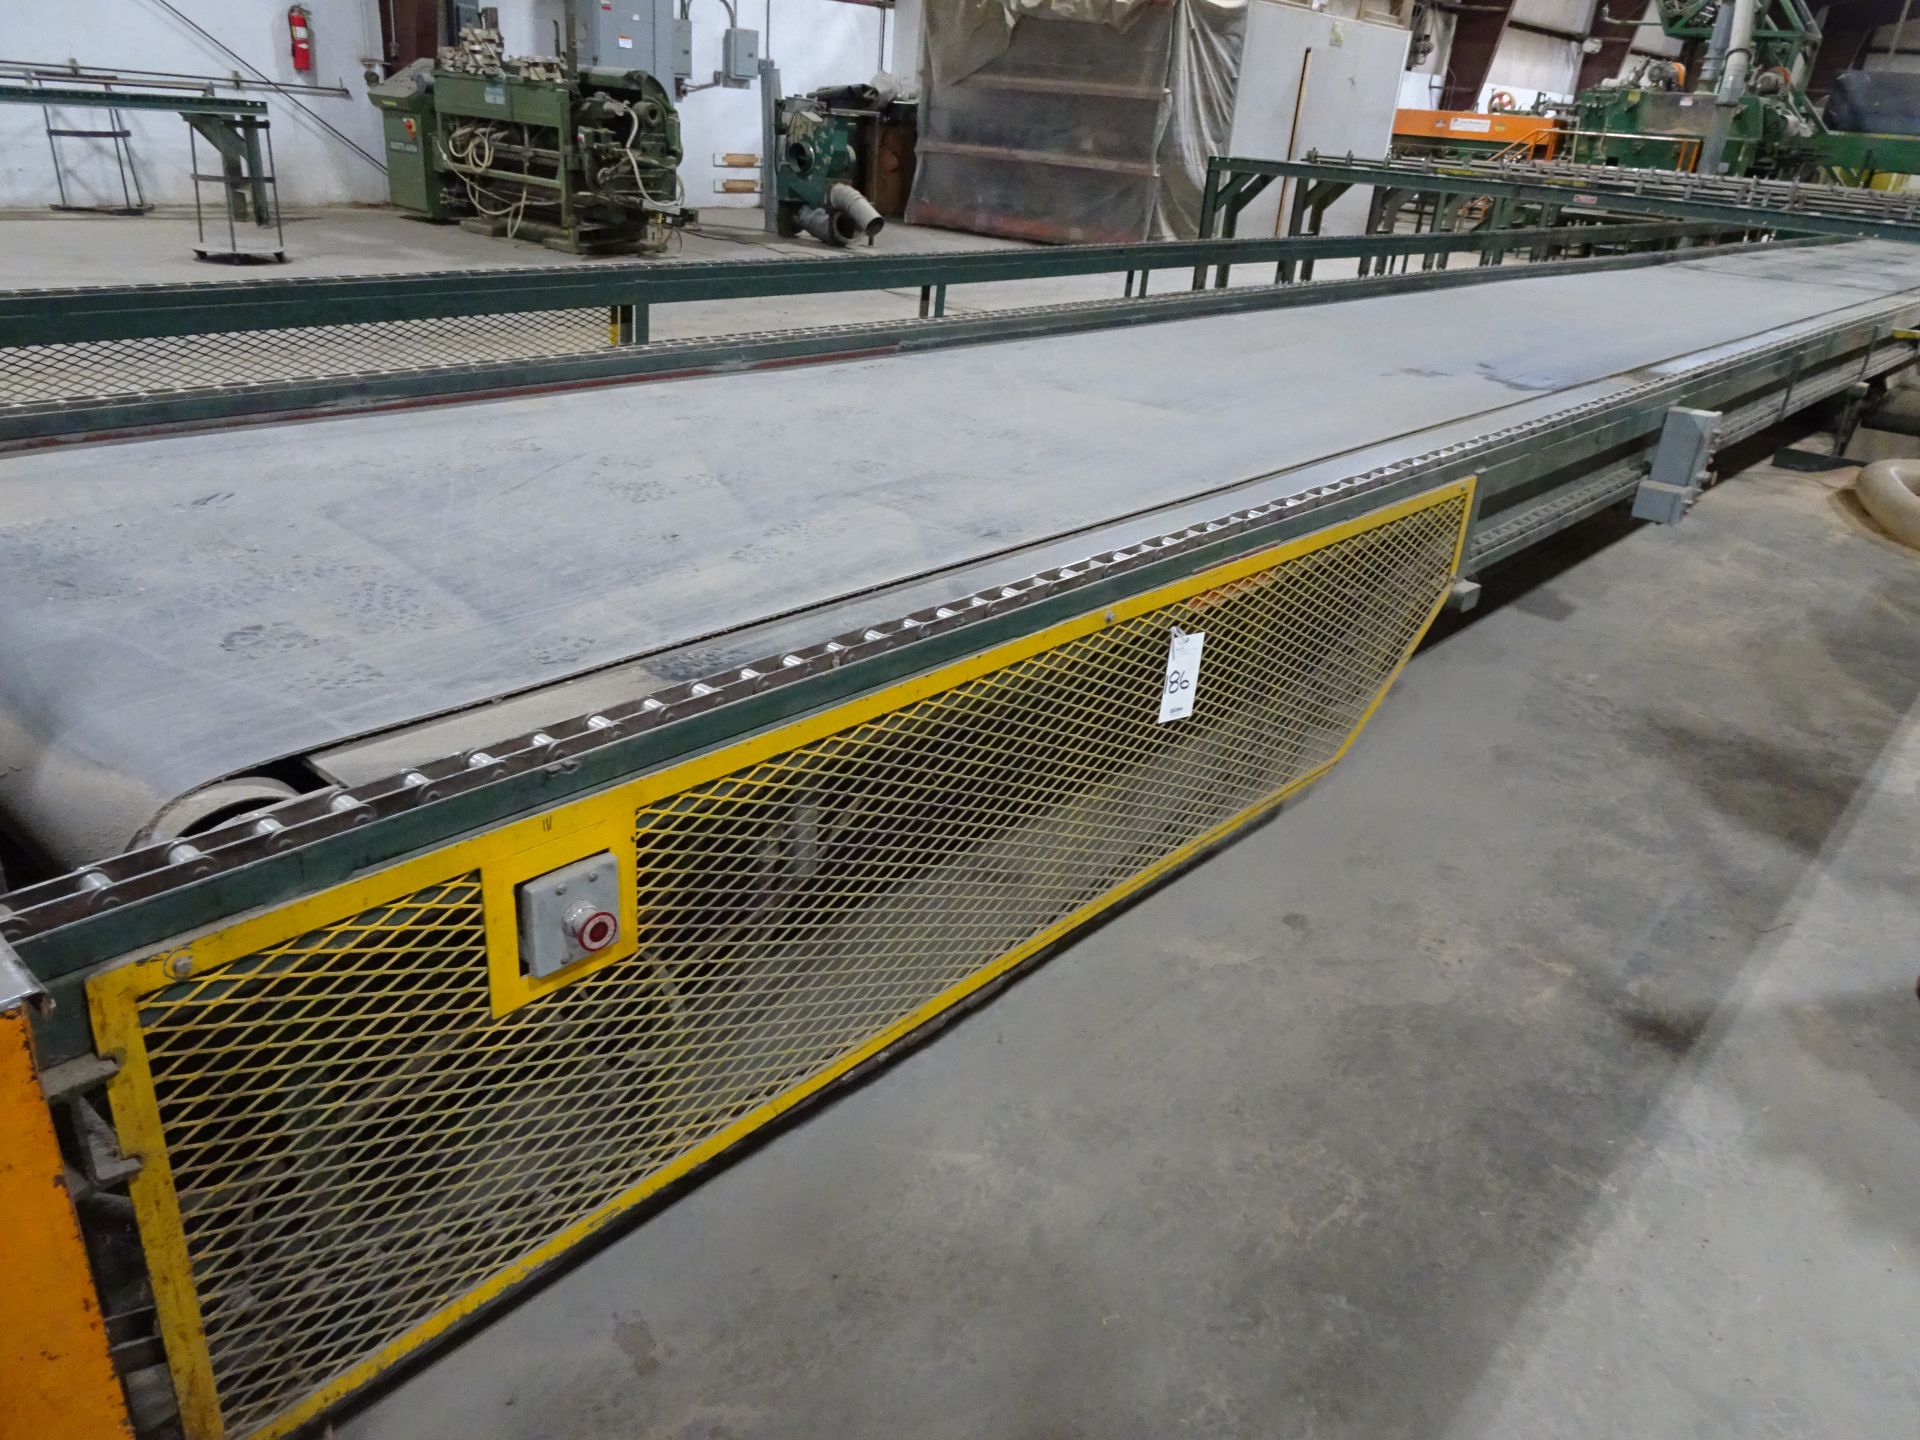 60' x 10' Wood Drag Chain and Belt , Location: DM Room